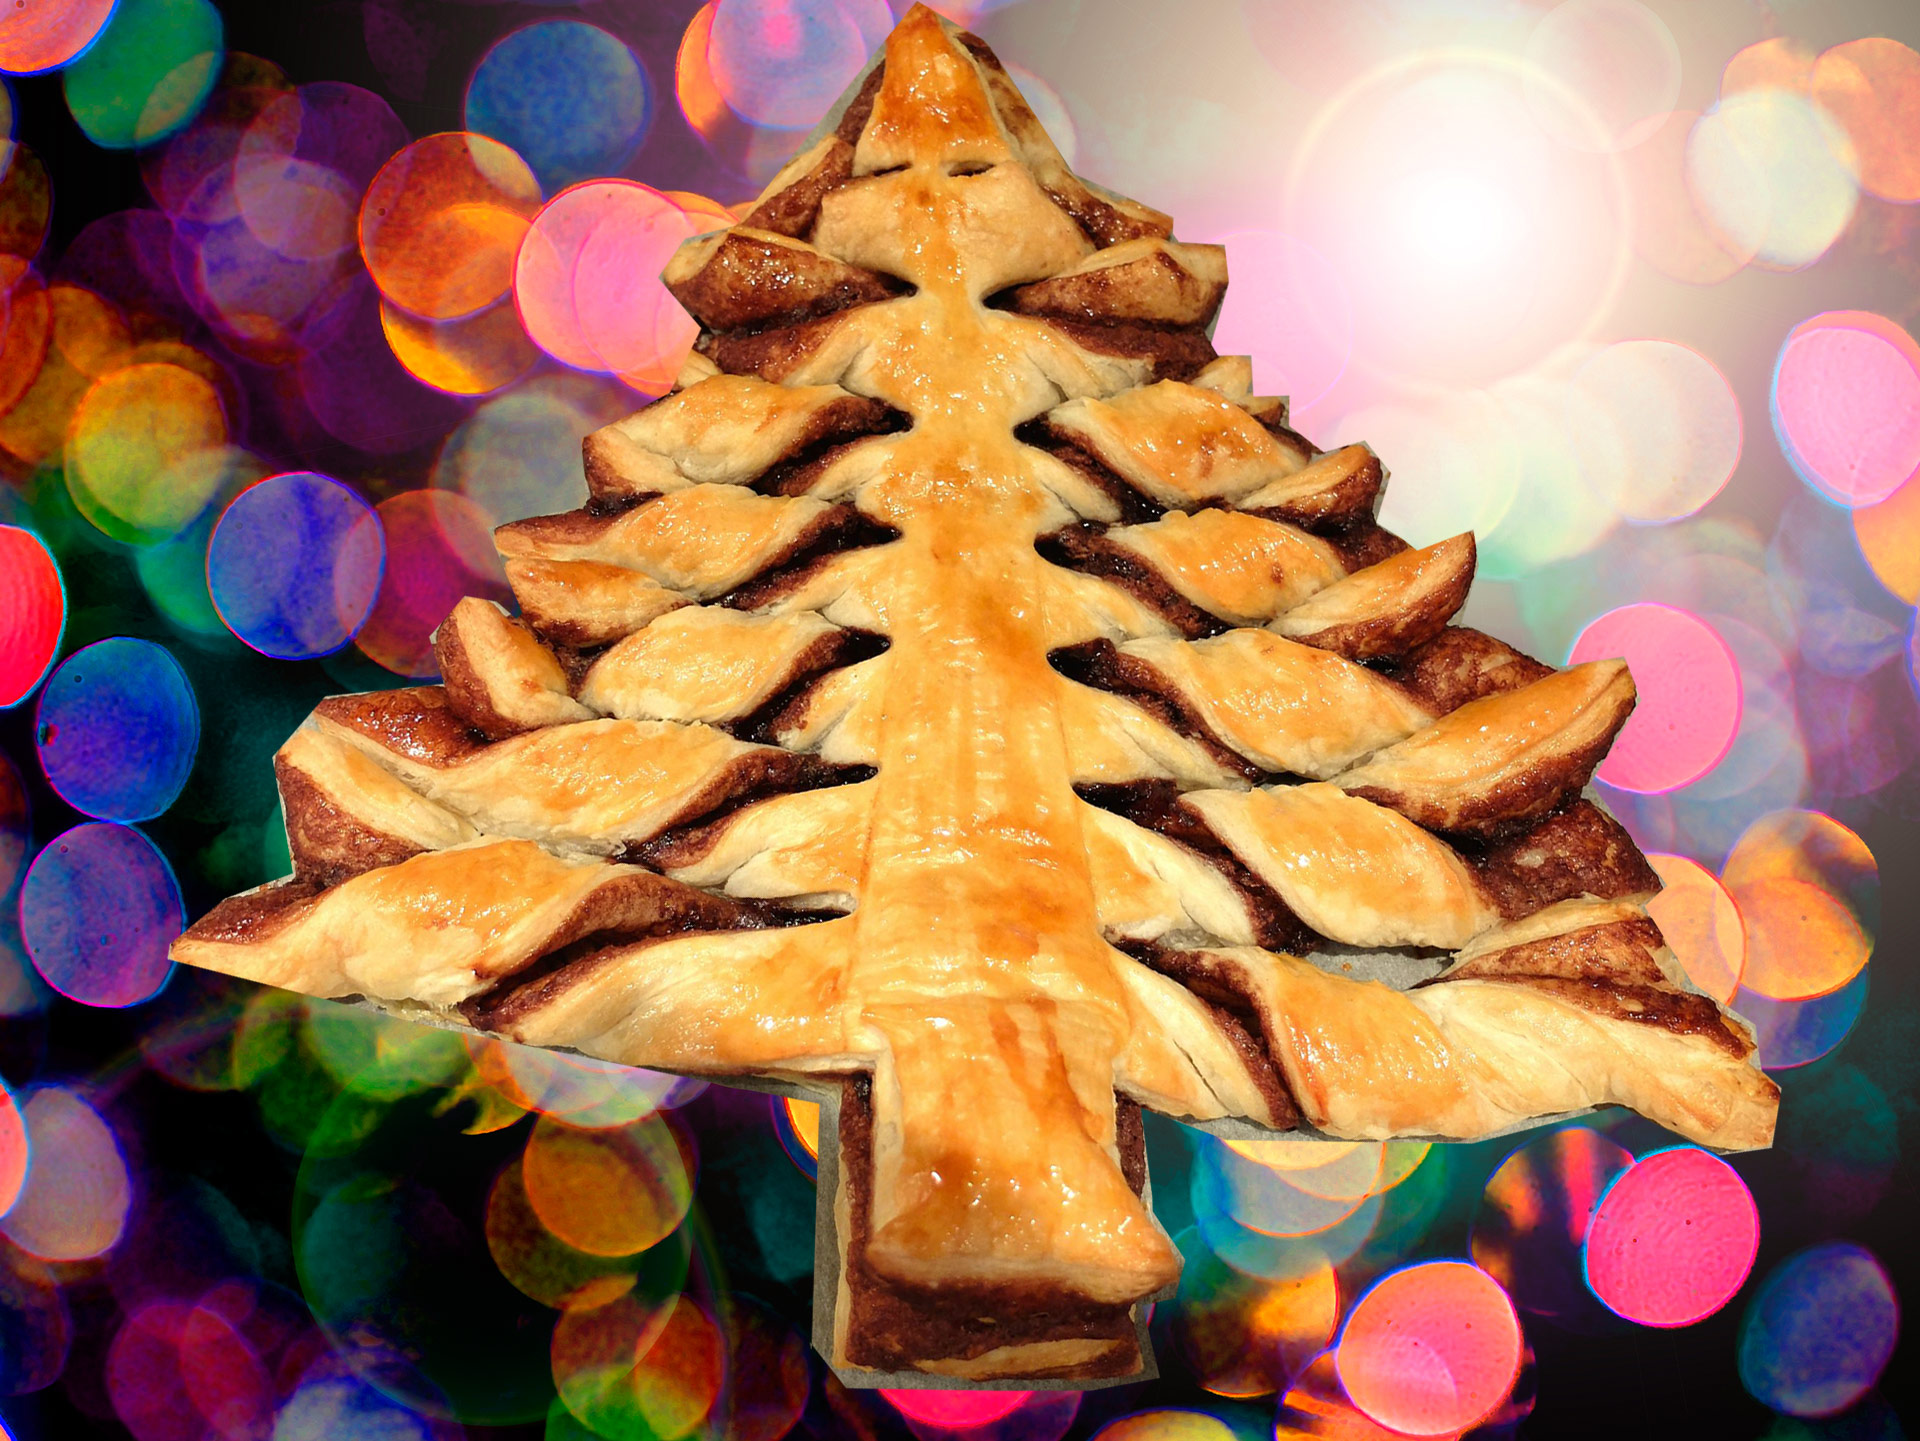 How to make the Nutella Christmas tree